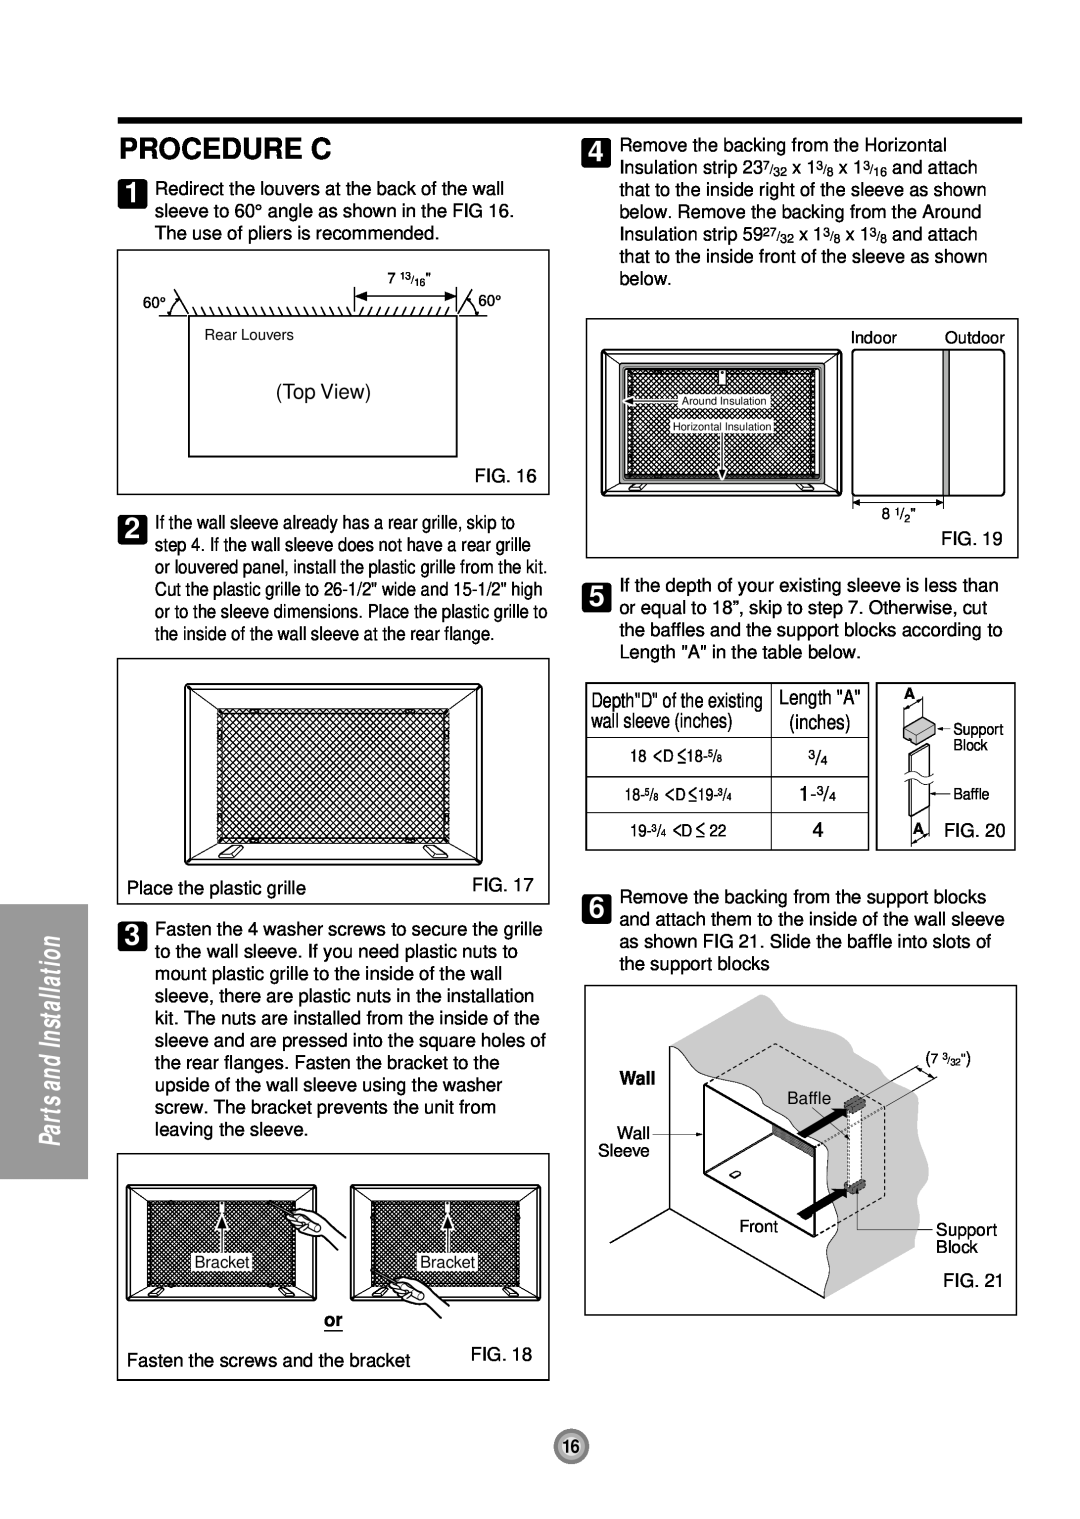 Friedrich US08, US10, US12 manual Procedure C, Parts and Installation, Wall 